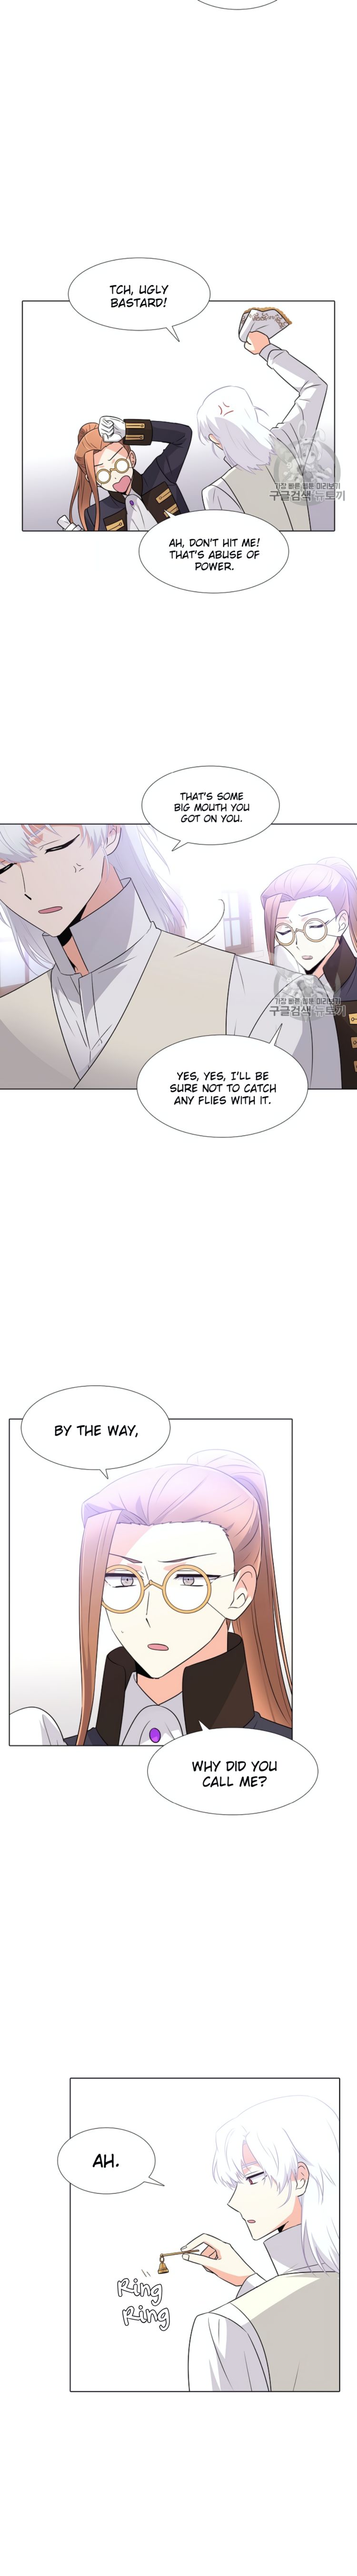 The Villain Discovered My Identity - Chapter 6 Page 8